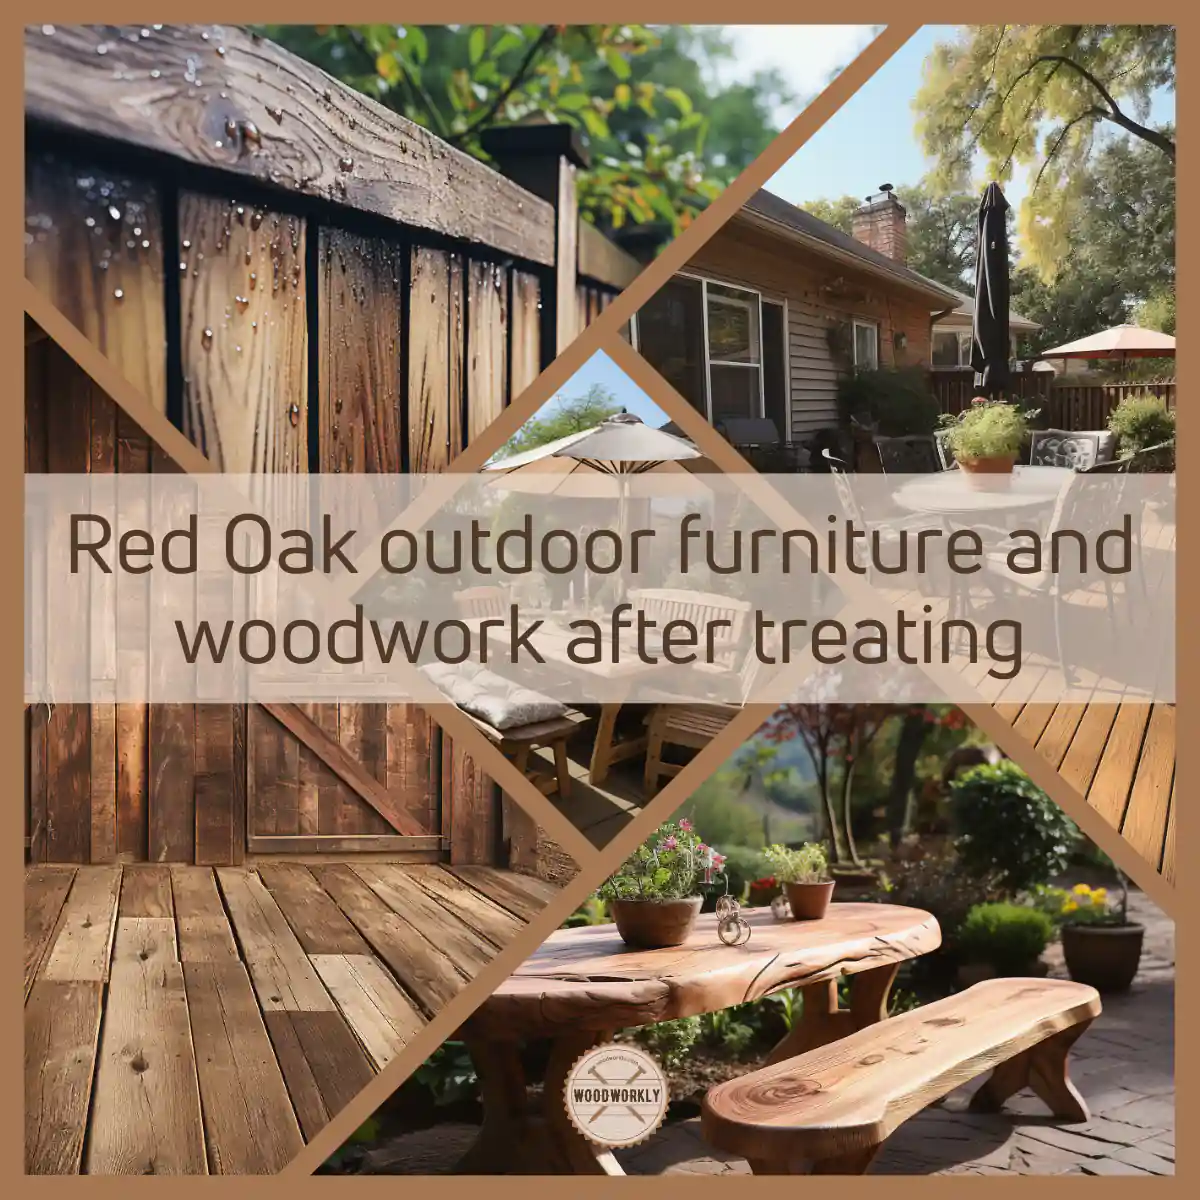 Red Oak outdoor furniture and woodwork after treating